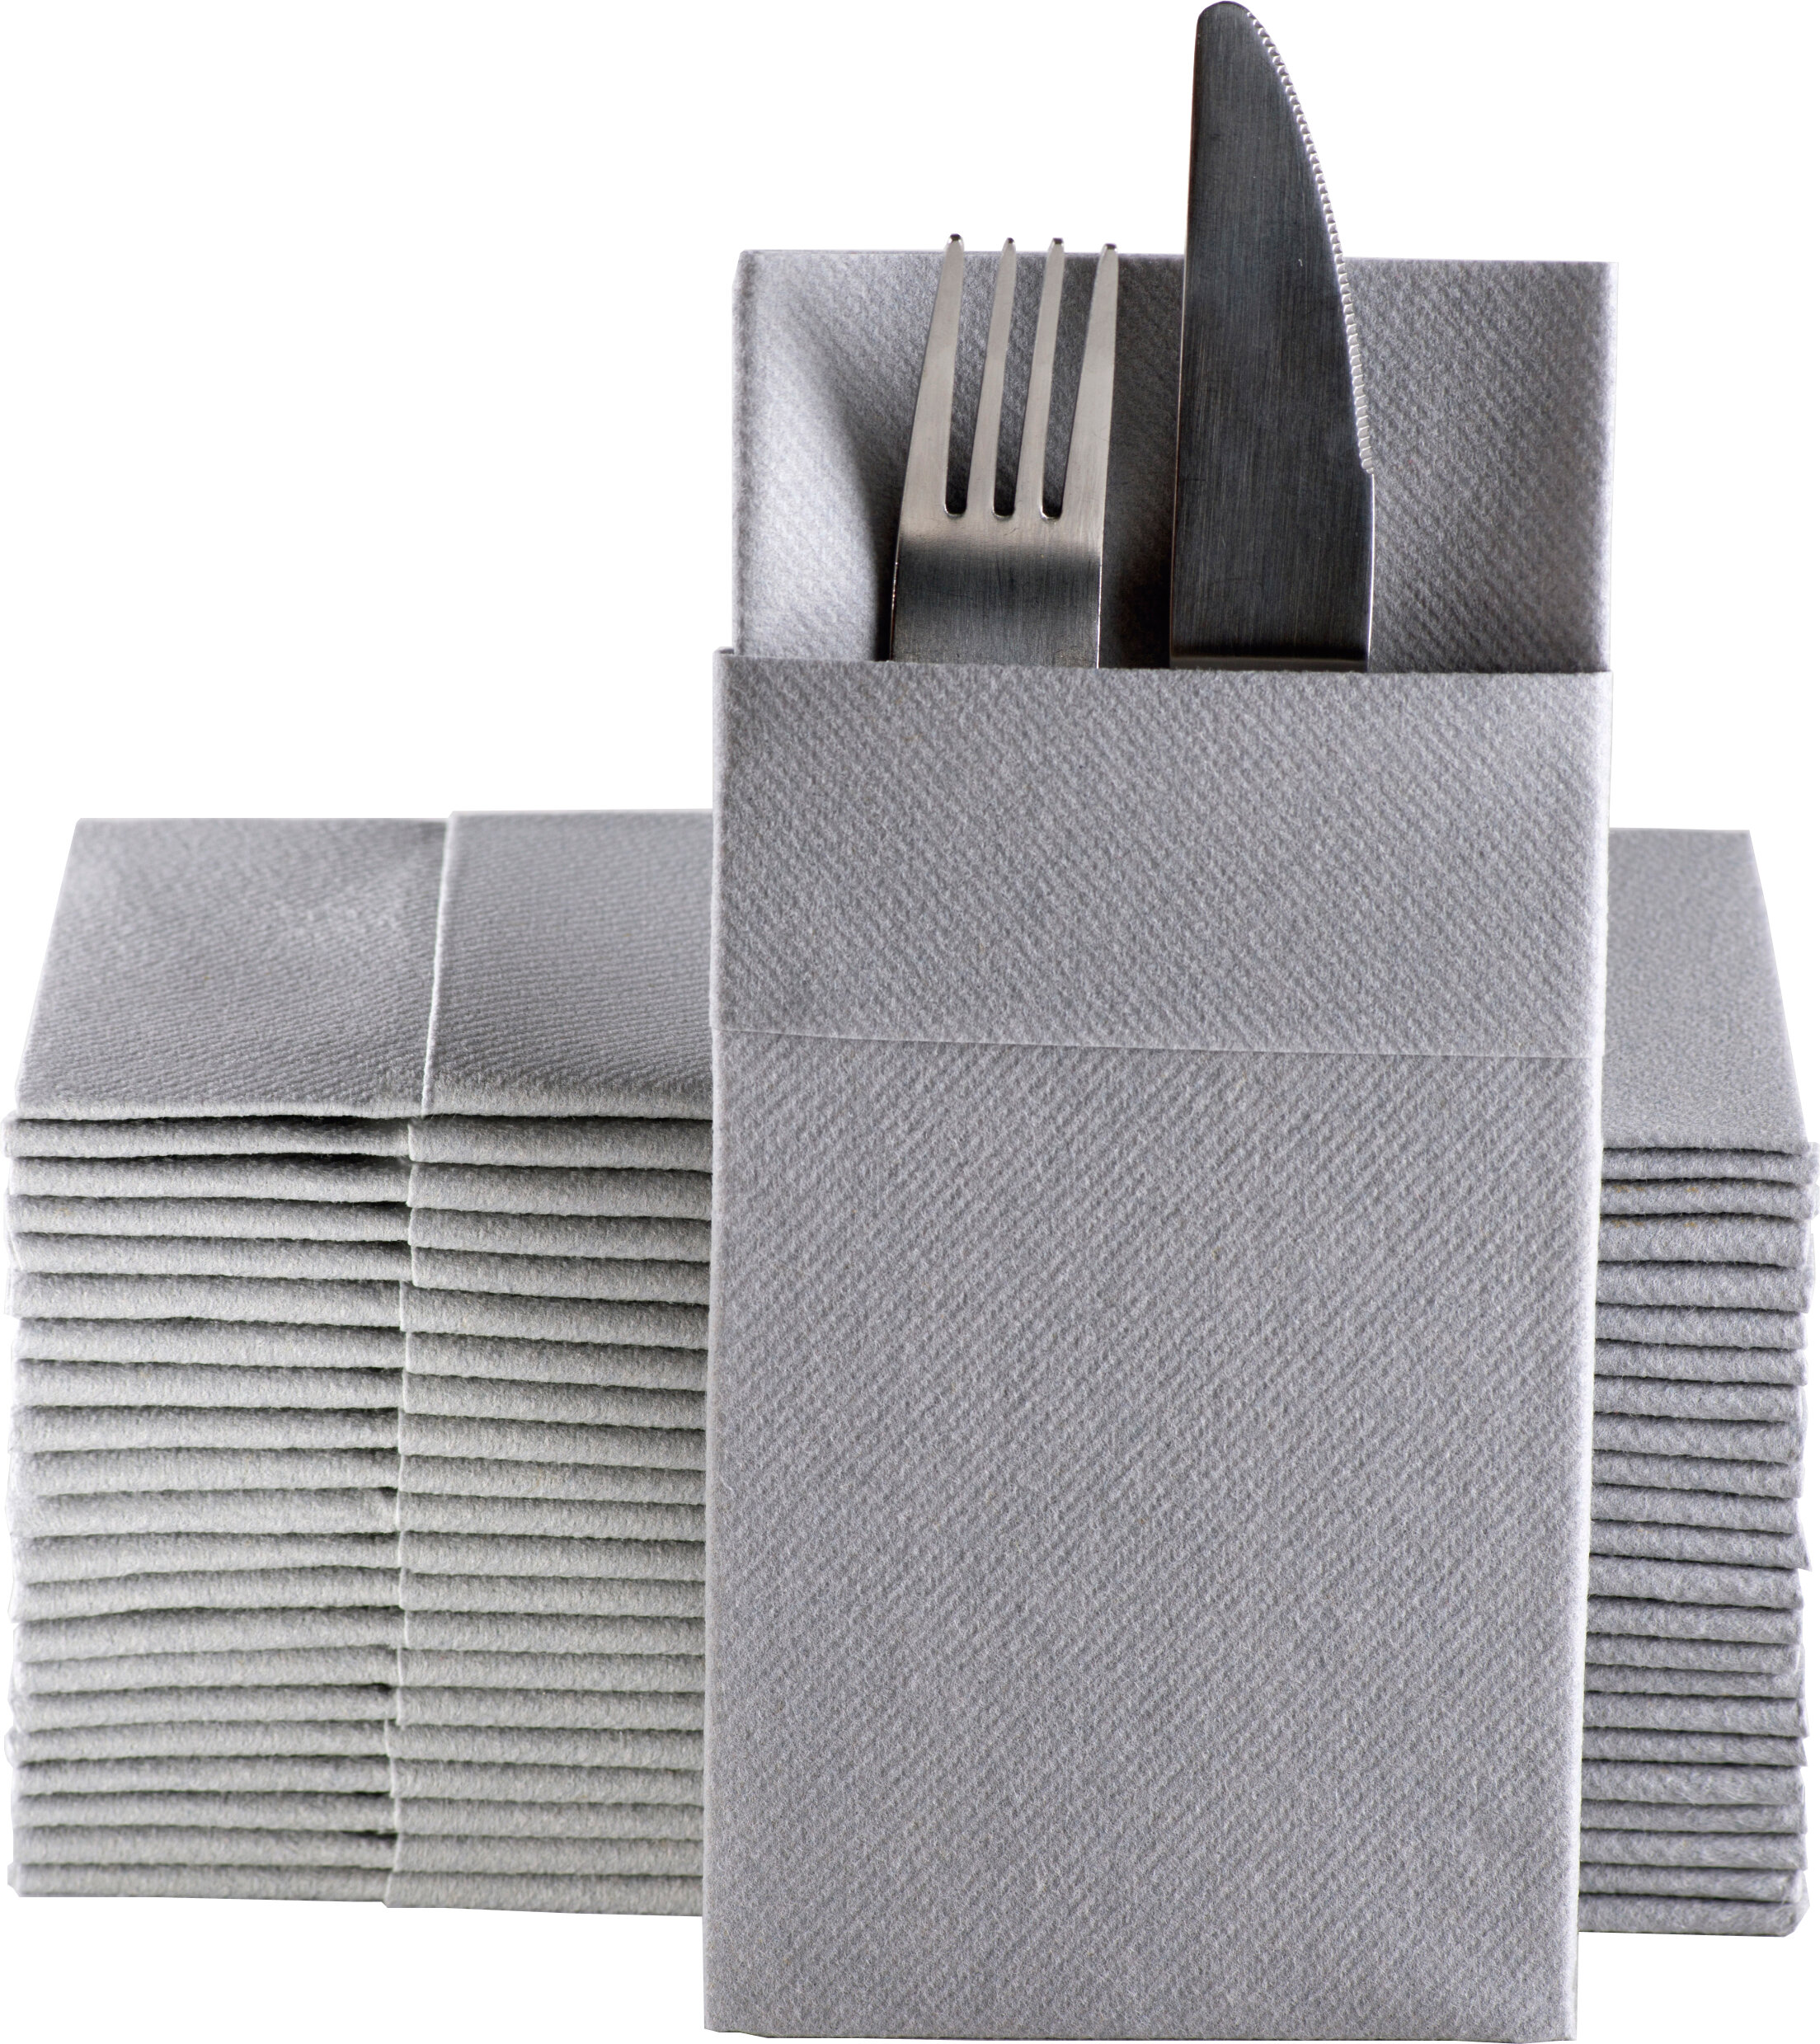 Pack of 100 Wedding Dinner Or Any Occasion. 100 Linen-Feel Colored Paper Napkins Decorative Cloth-Like GRAY Luncheon Napkins Party For Kitchen Soft And Absorbent 